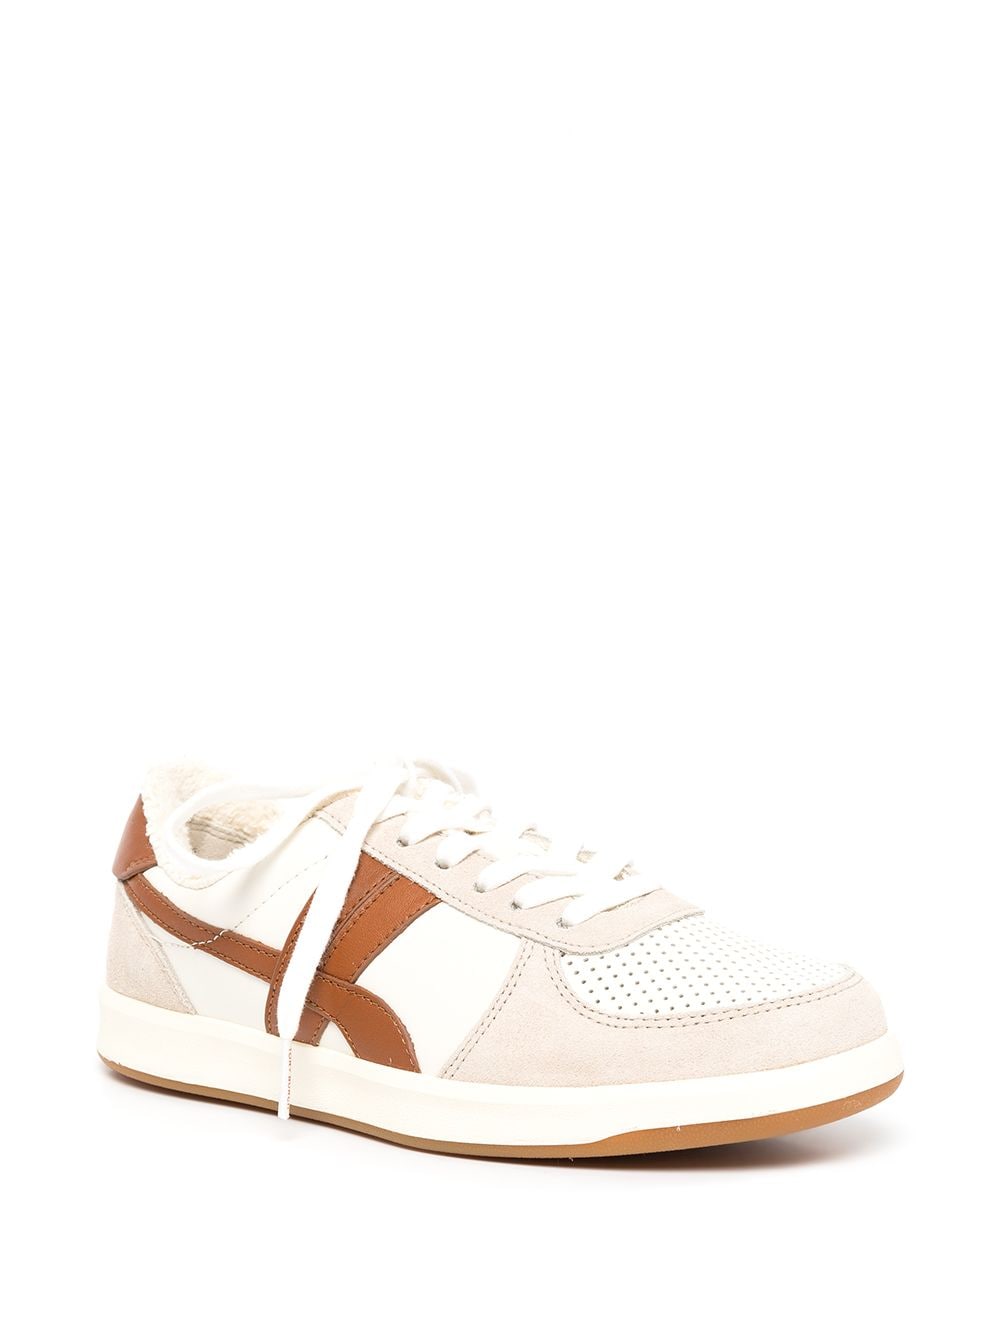 Tory Burch Hank Court Sneakers In White | ModeSens